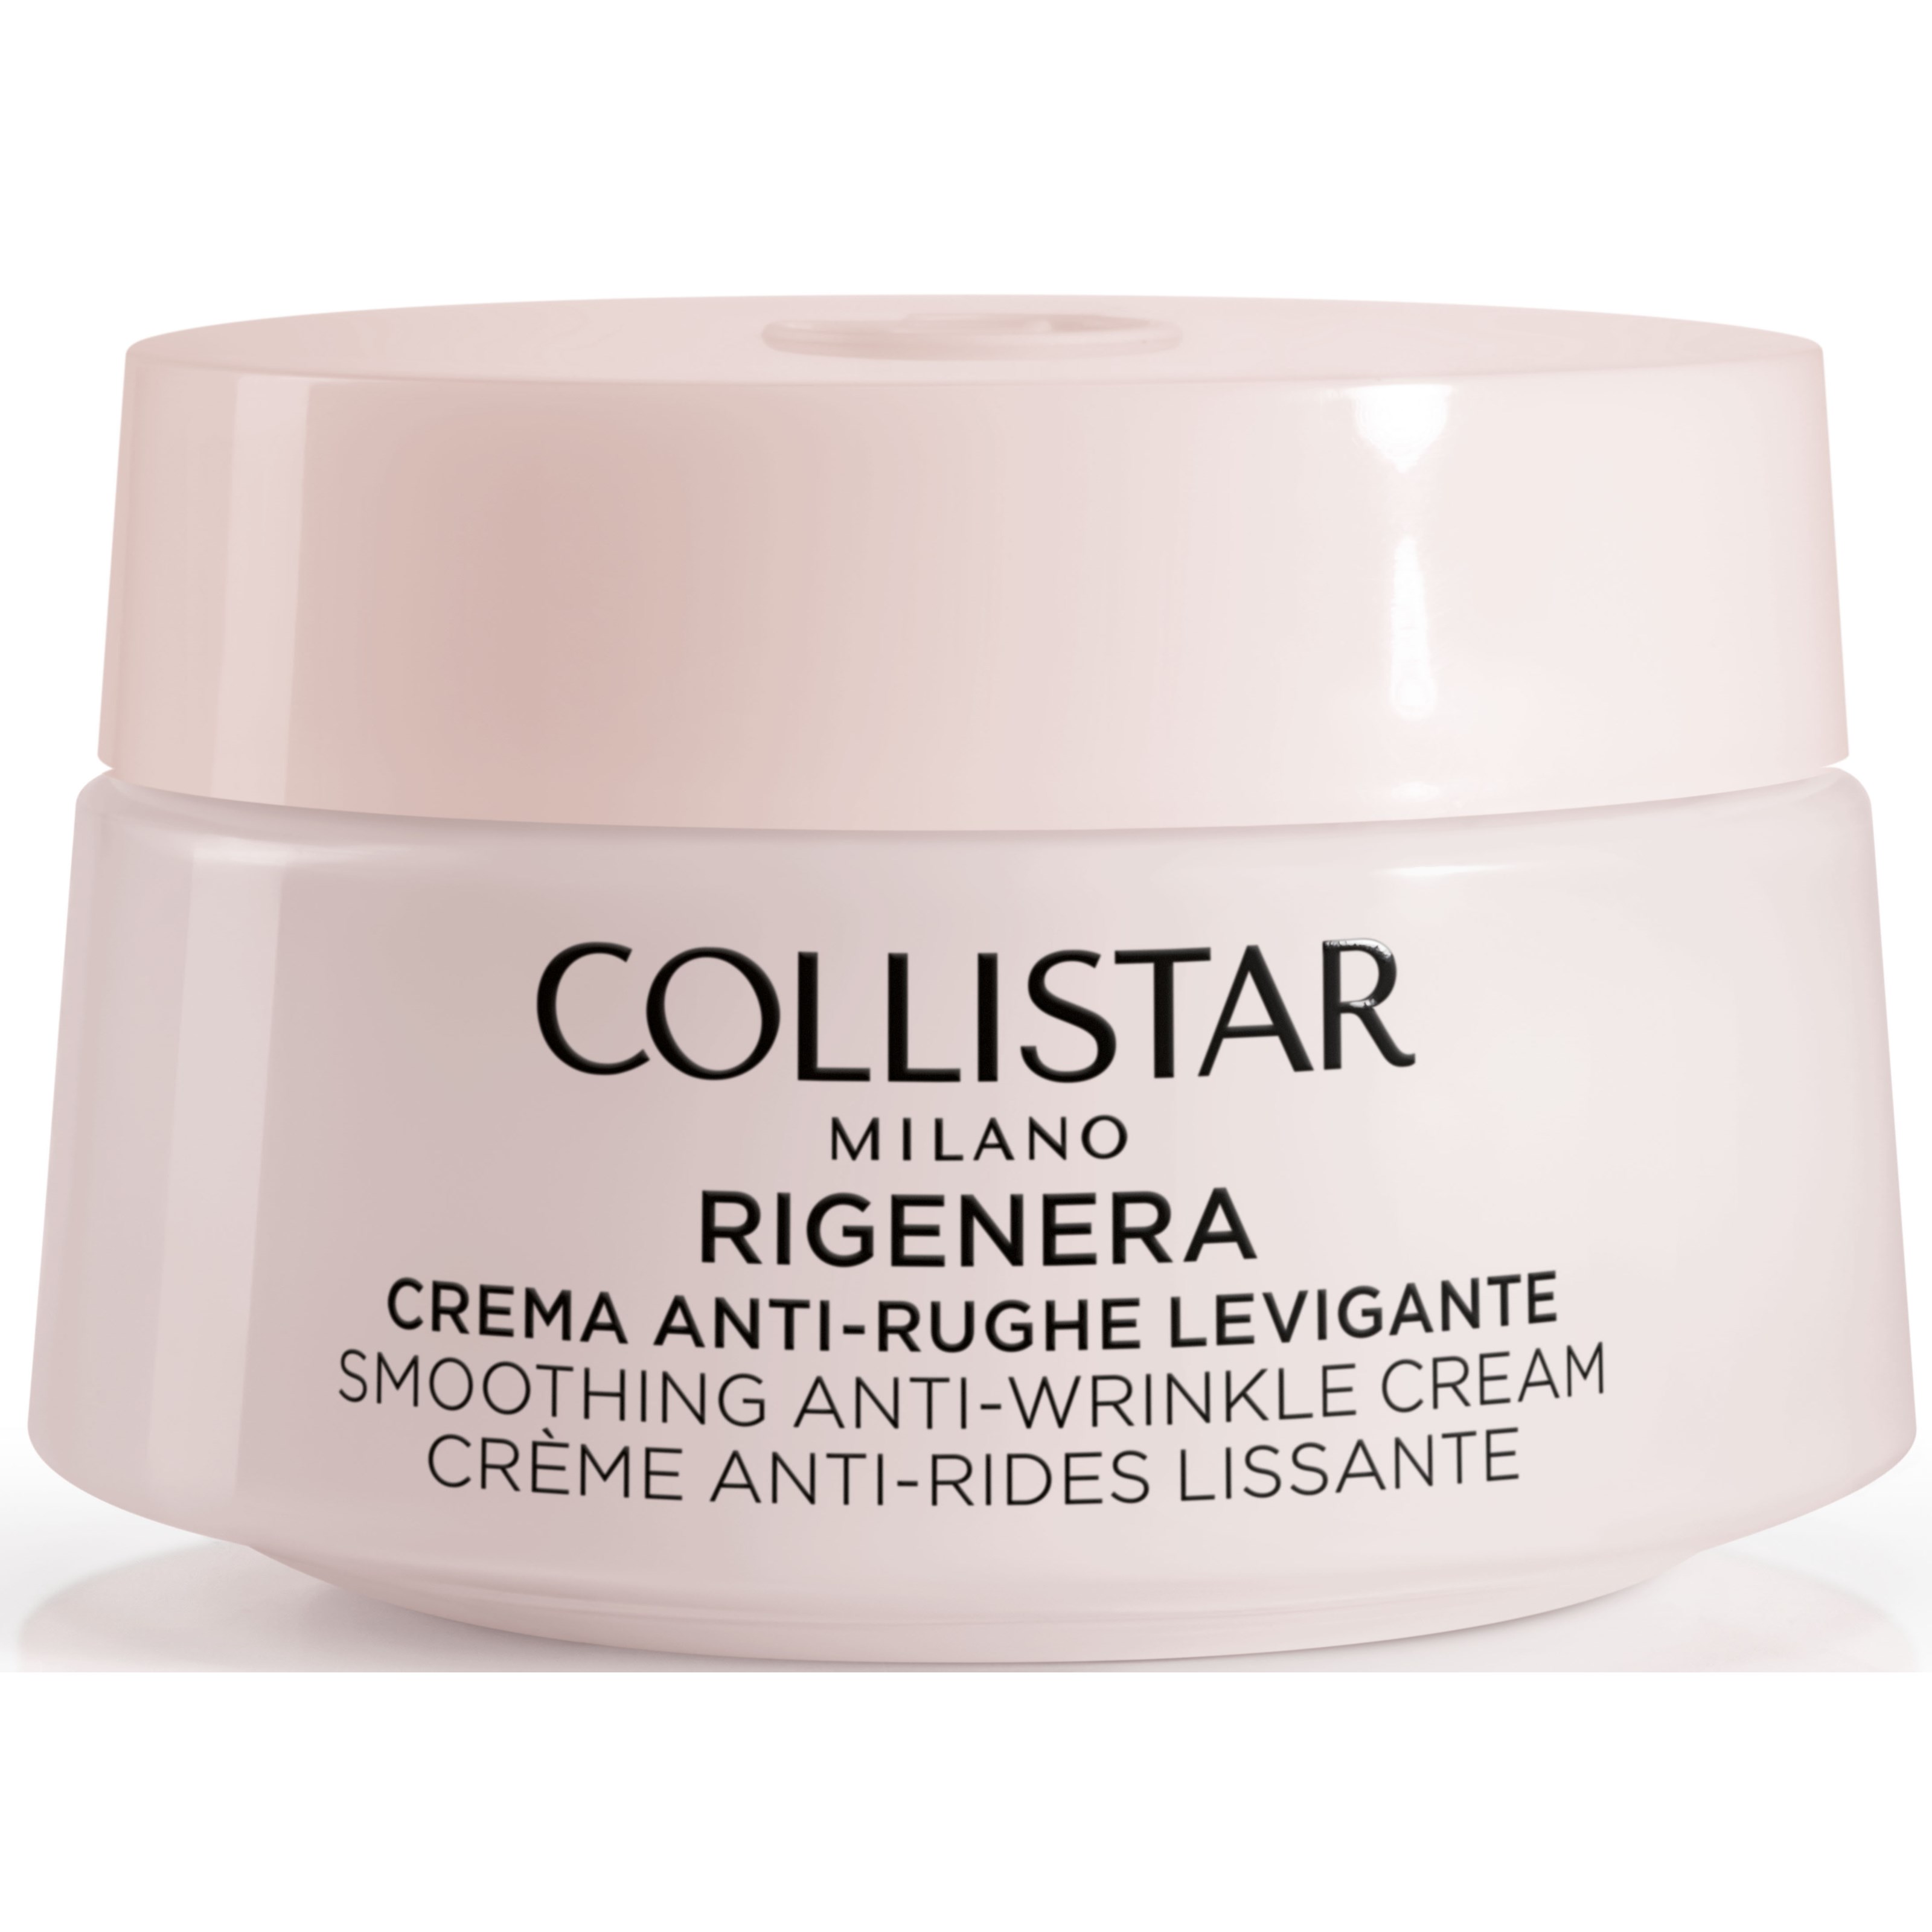 Collistar Rigenera Smoothing Anti-Wrinkle Cream Face And Neck 50 ml